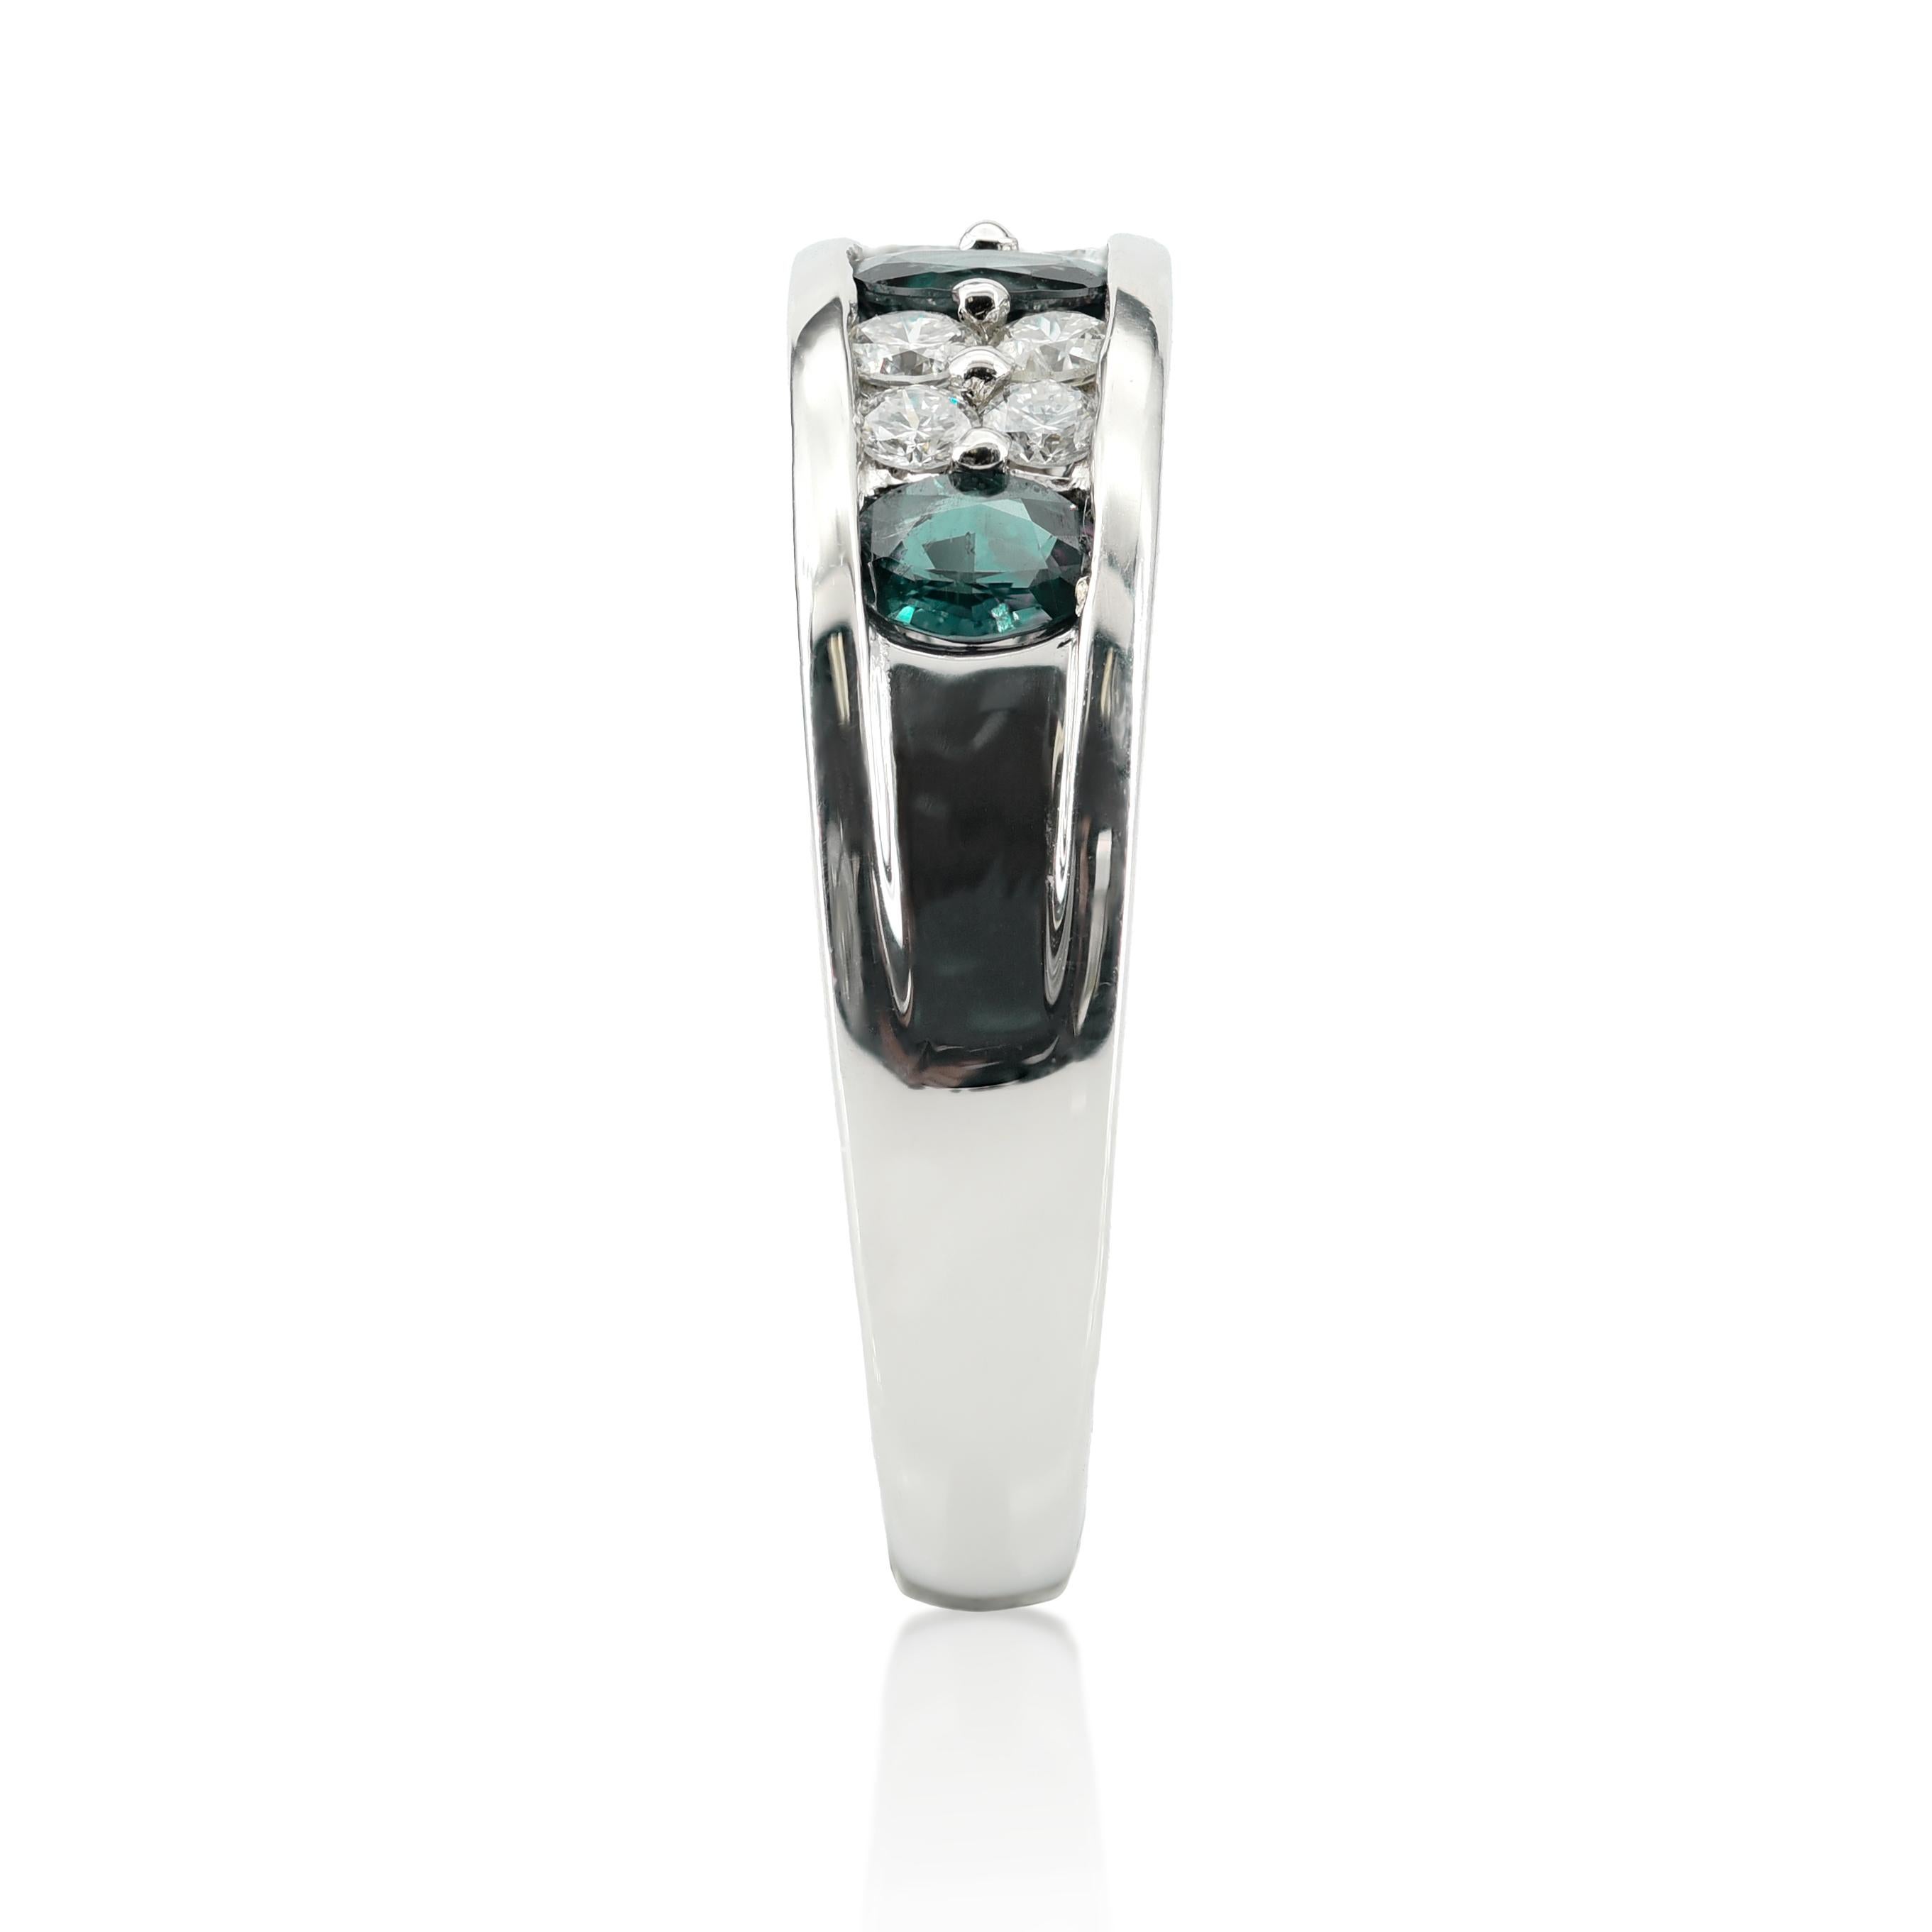 Mixed Cut GIA Certified 0.63 Carats Alexandrite Diamonds set in Platinum Ring For Sale